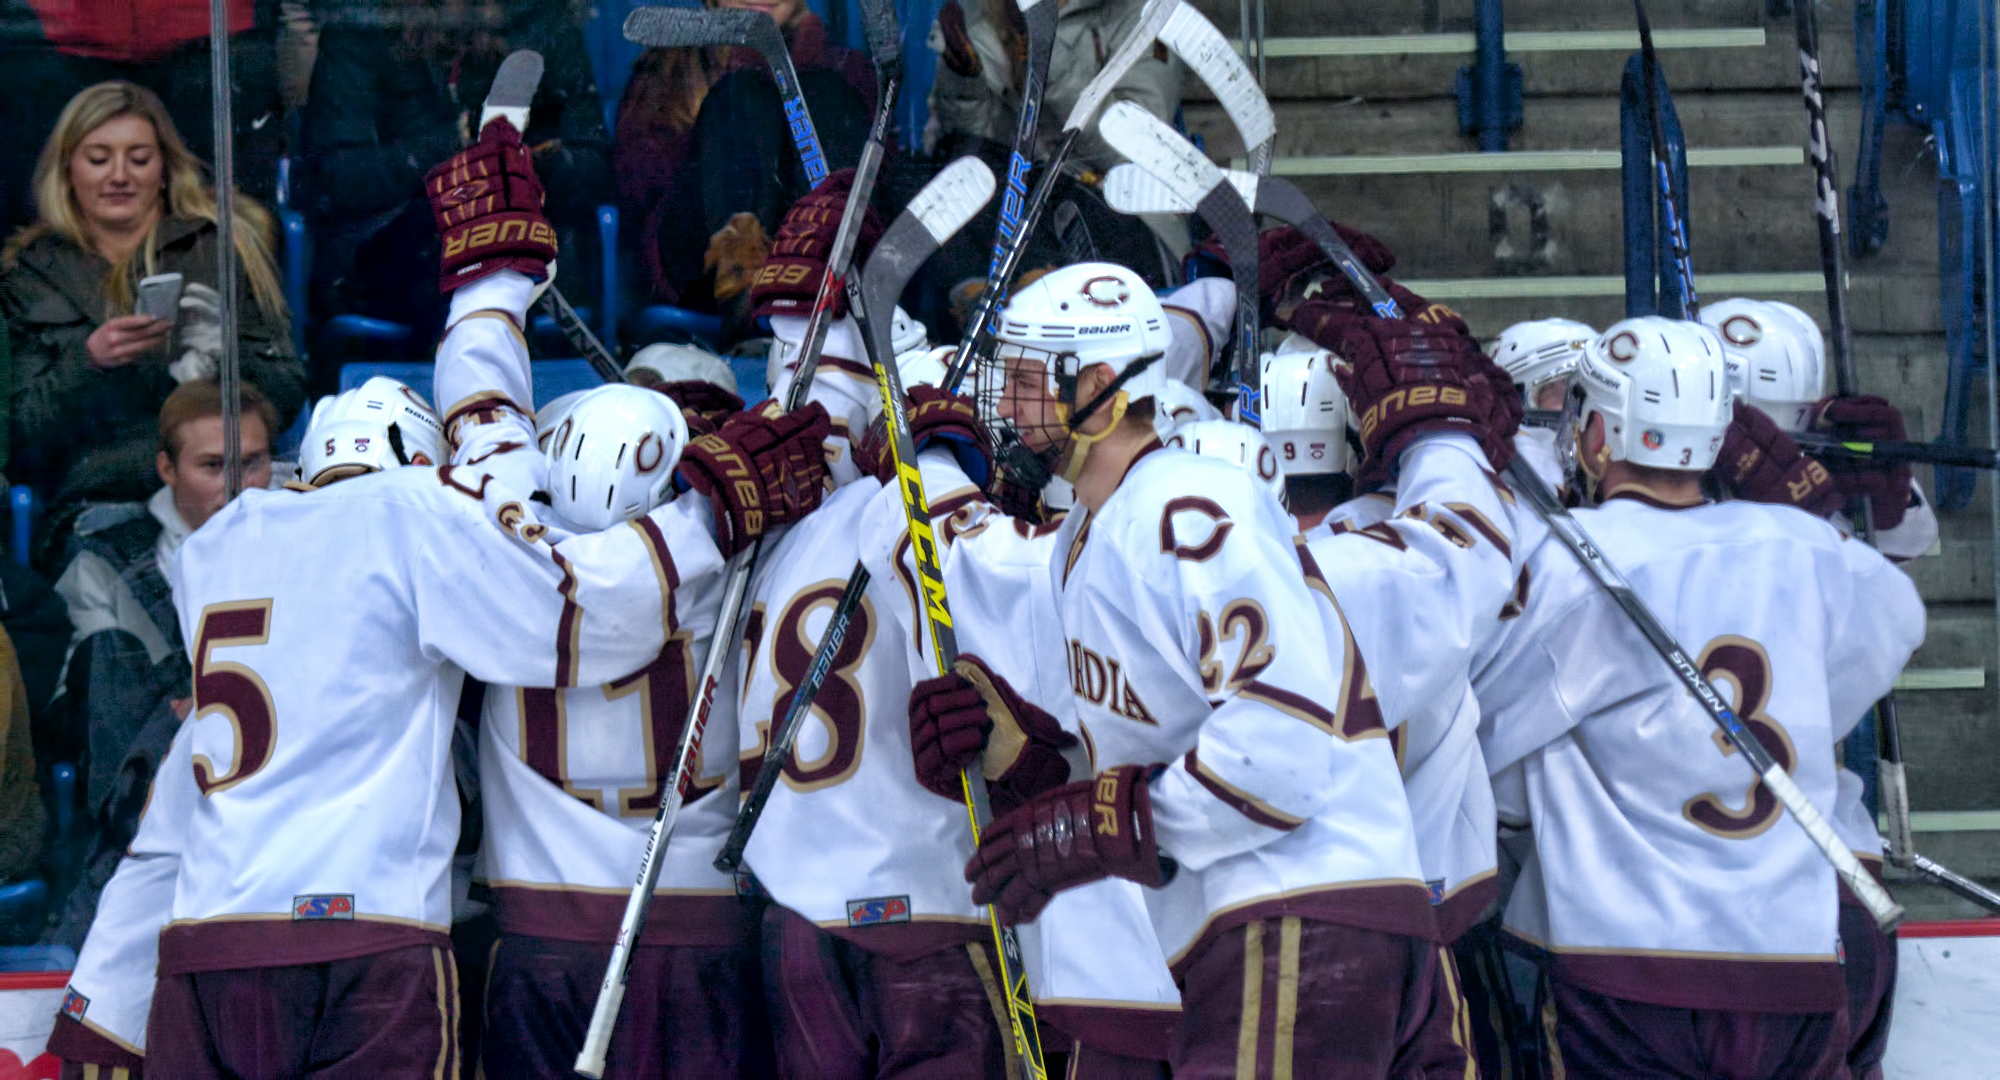 Concordia players spill on to the ice to celebrate Dalton Mills' game-winning goal in overtime against St. Mary's.